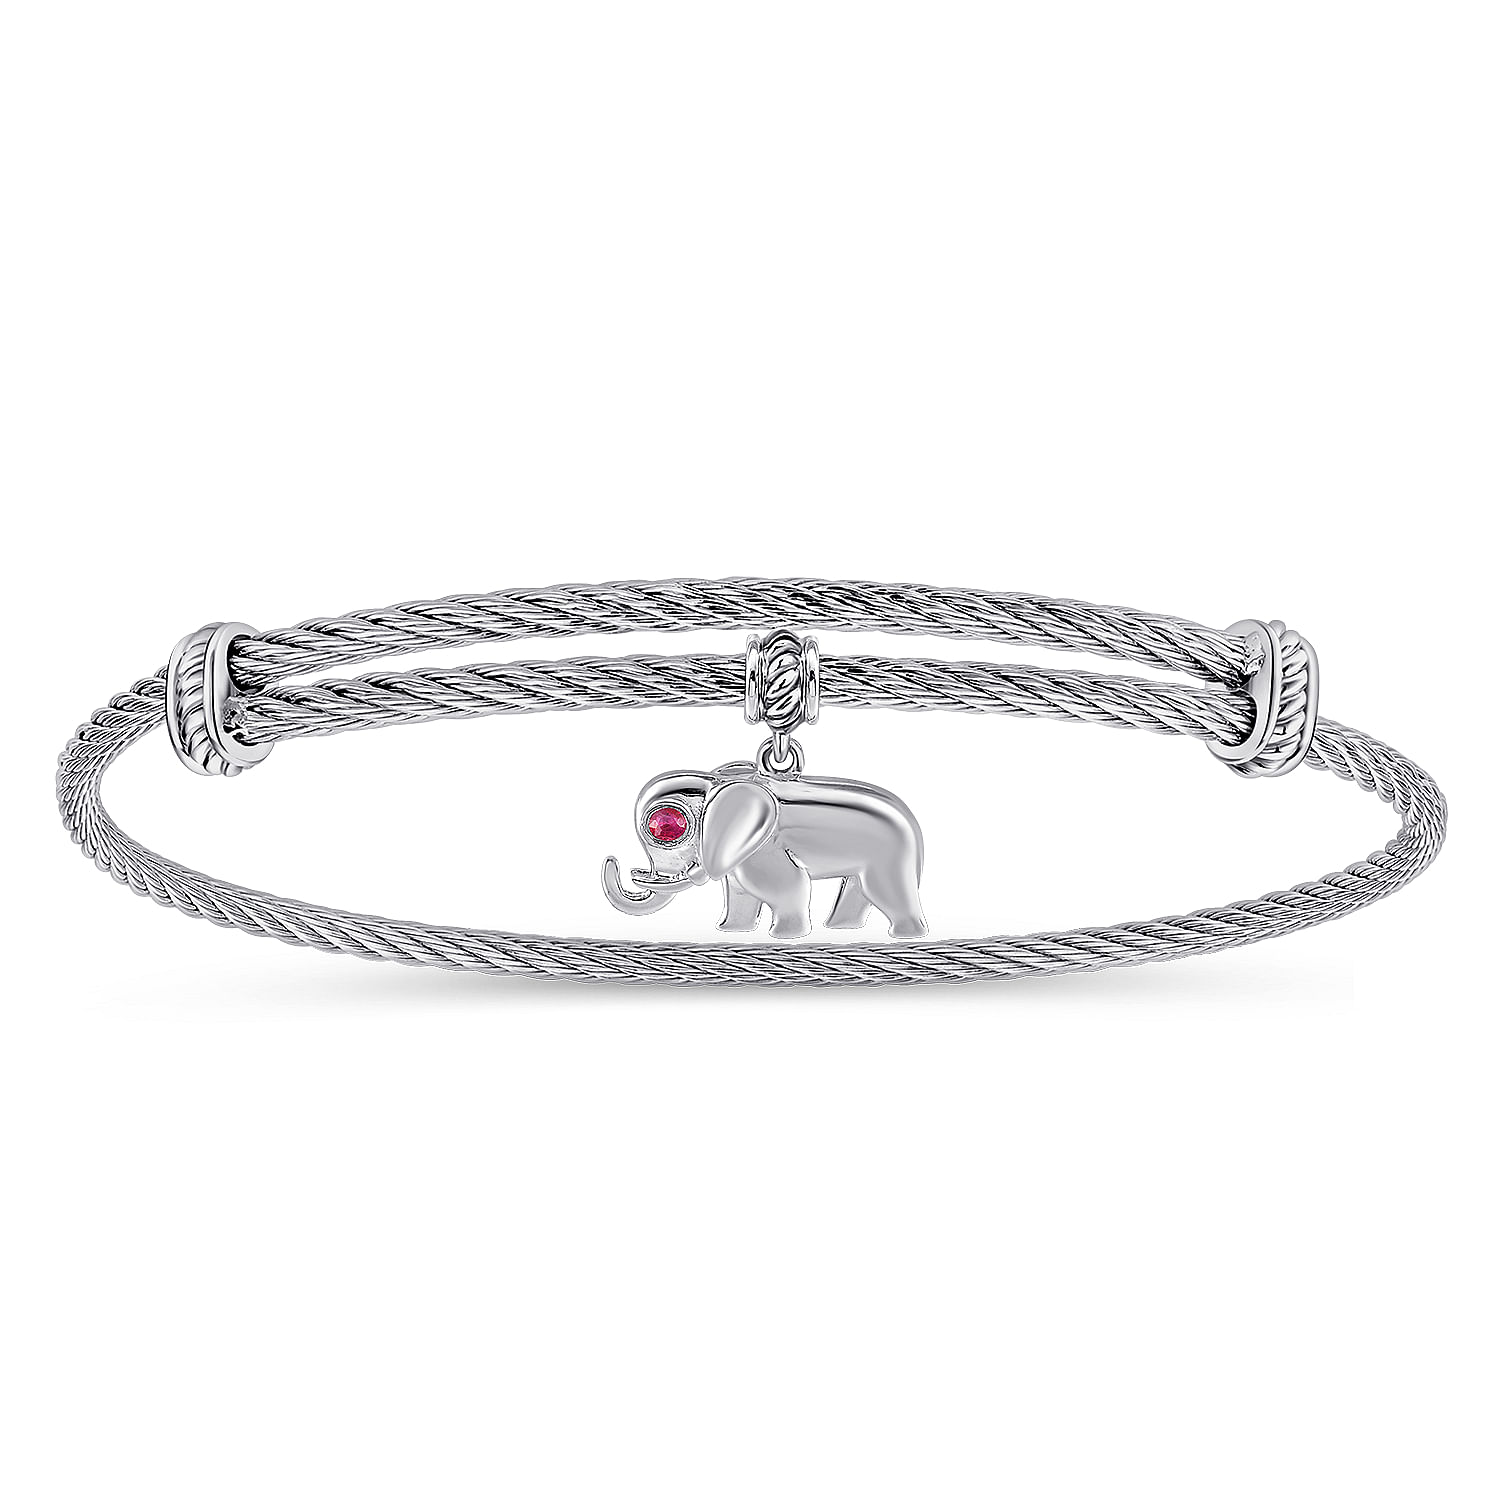 Sterling Silver bracelet with Ruby charms